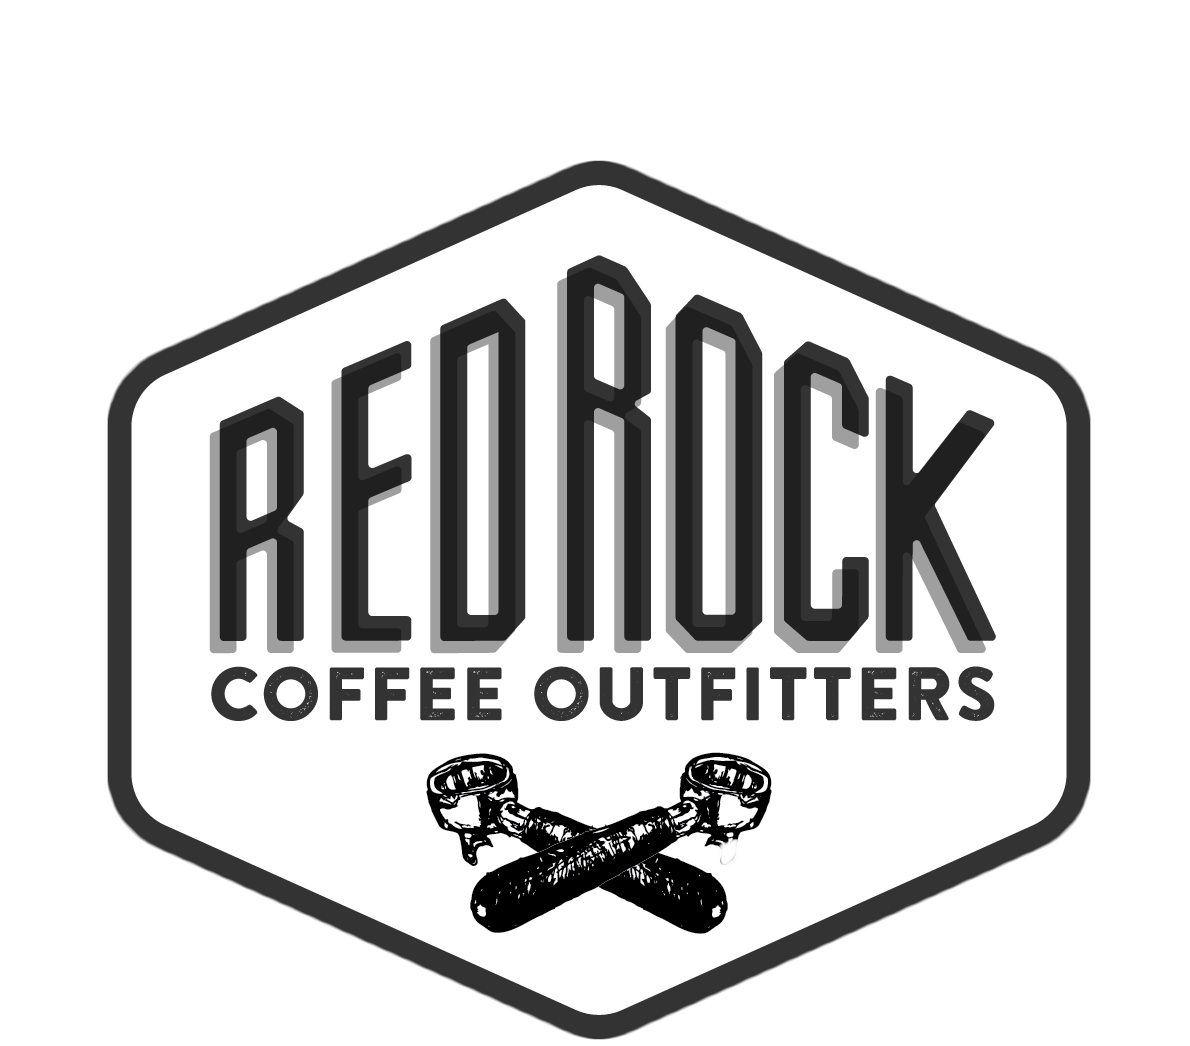 Red Rock Coffee Outfitters